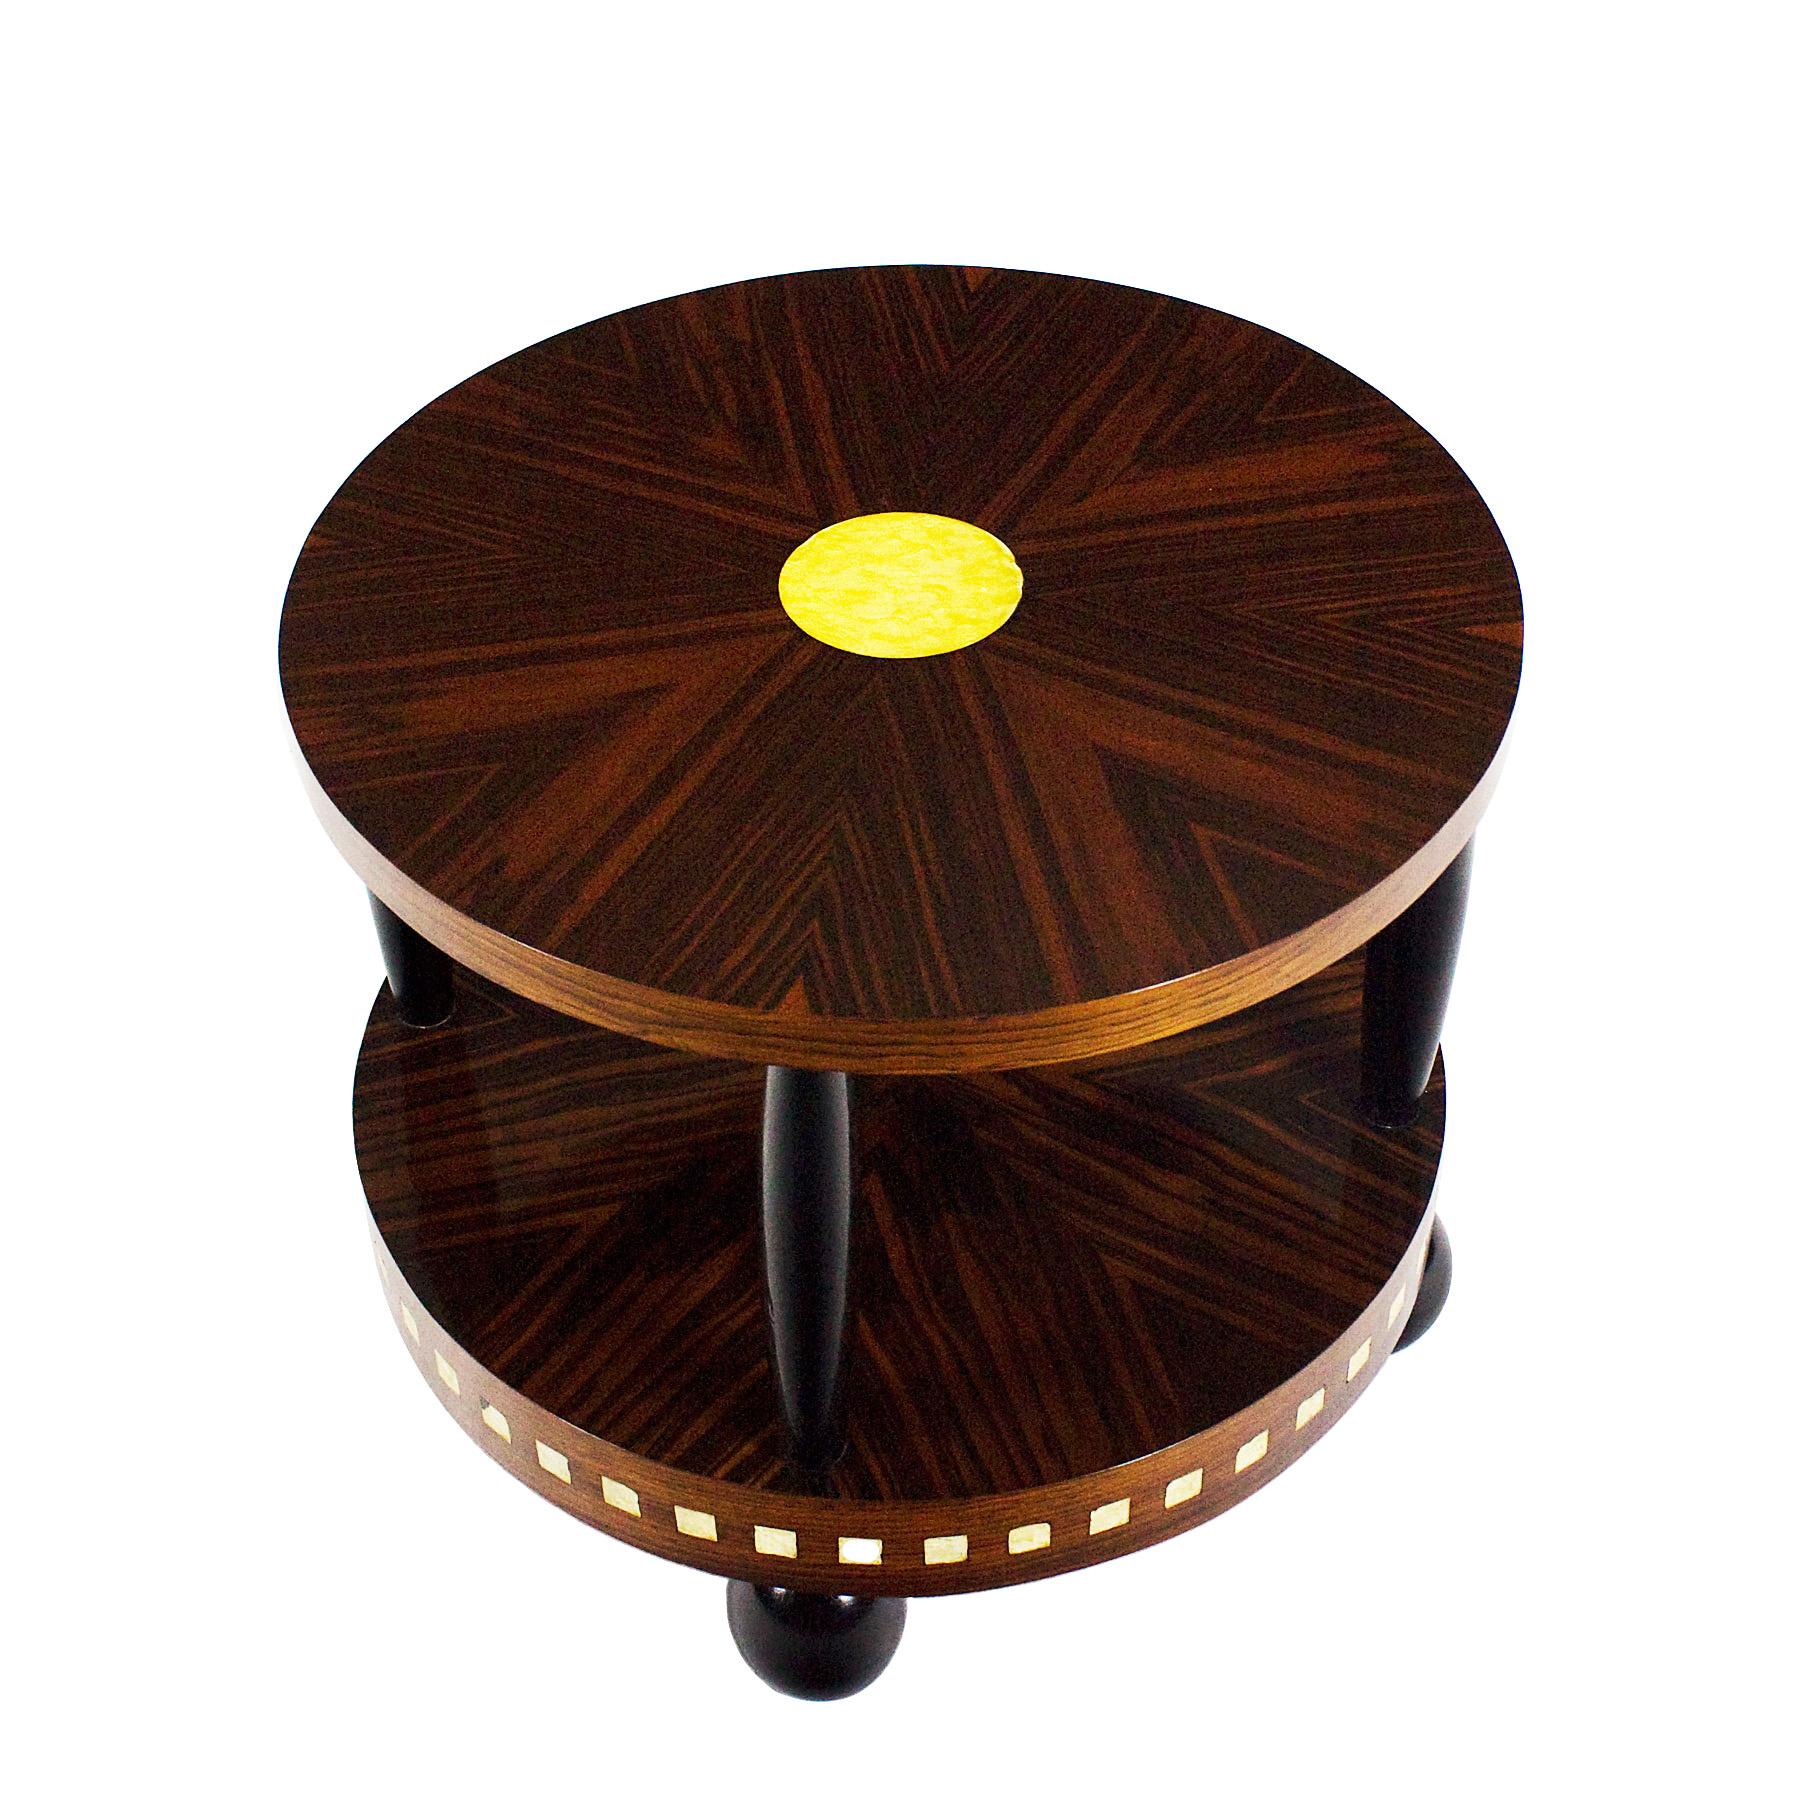 French 1925 Art Deco Sidetable by Francisque Chaleyssin, Macassar, Mahogany - France For Sale